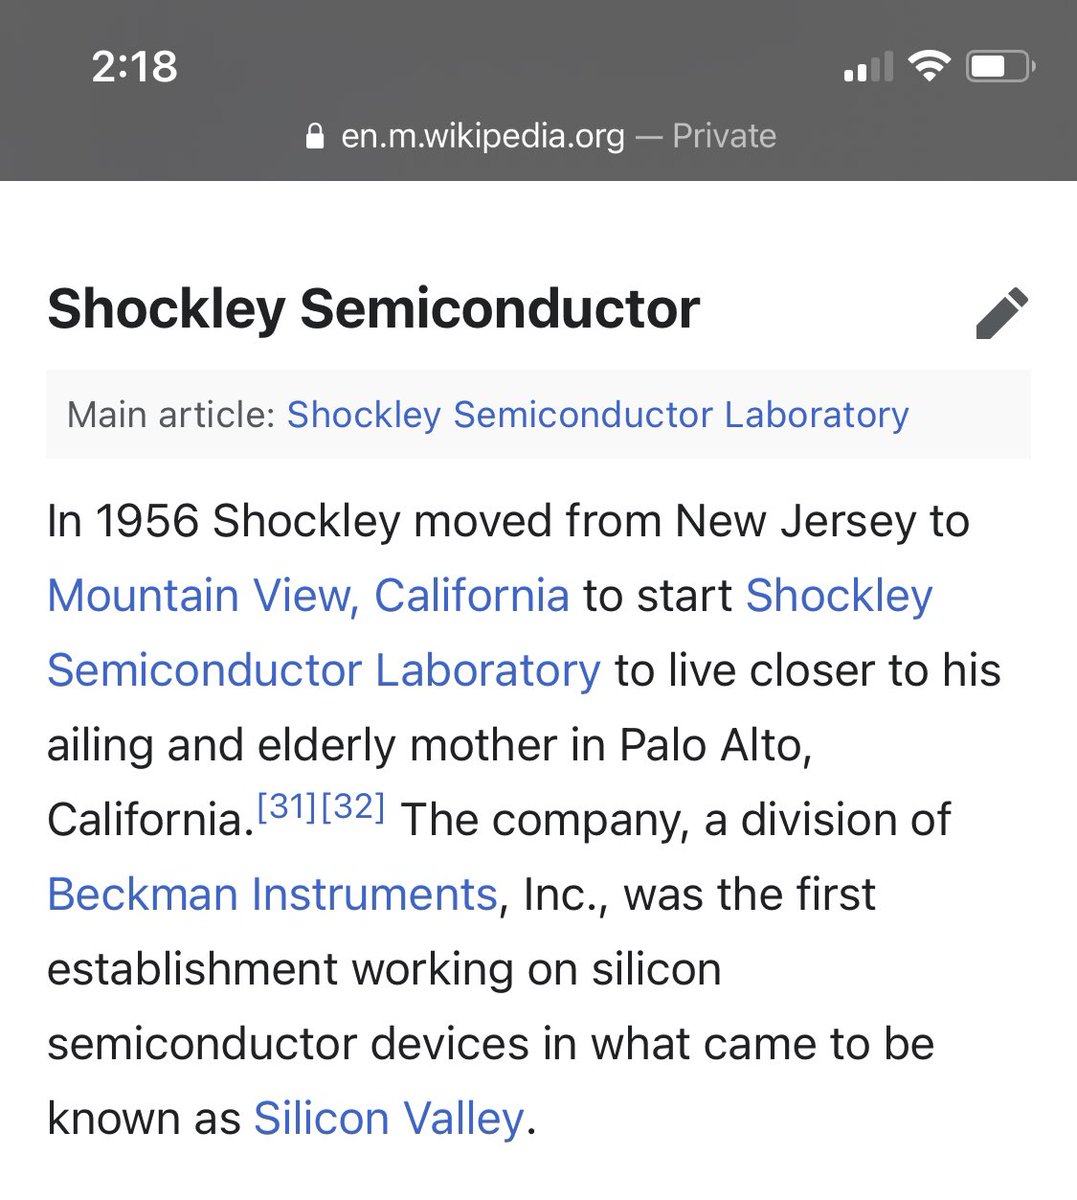 1) Shockley was a legend at Bell Labs in New Jersey. In 1956 he left to start Shockley Semiconductor. When choosing a geography he settled in Menlo Park to be closer to his ailing mother. This was profiled in “Moore’s Law” but here it is on Wiki